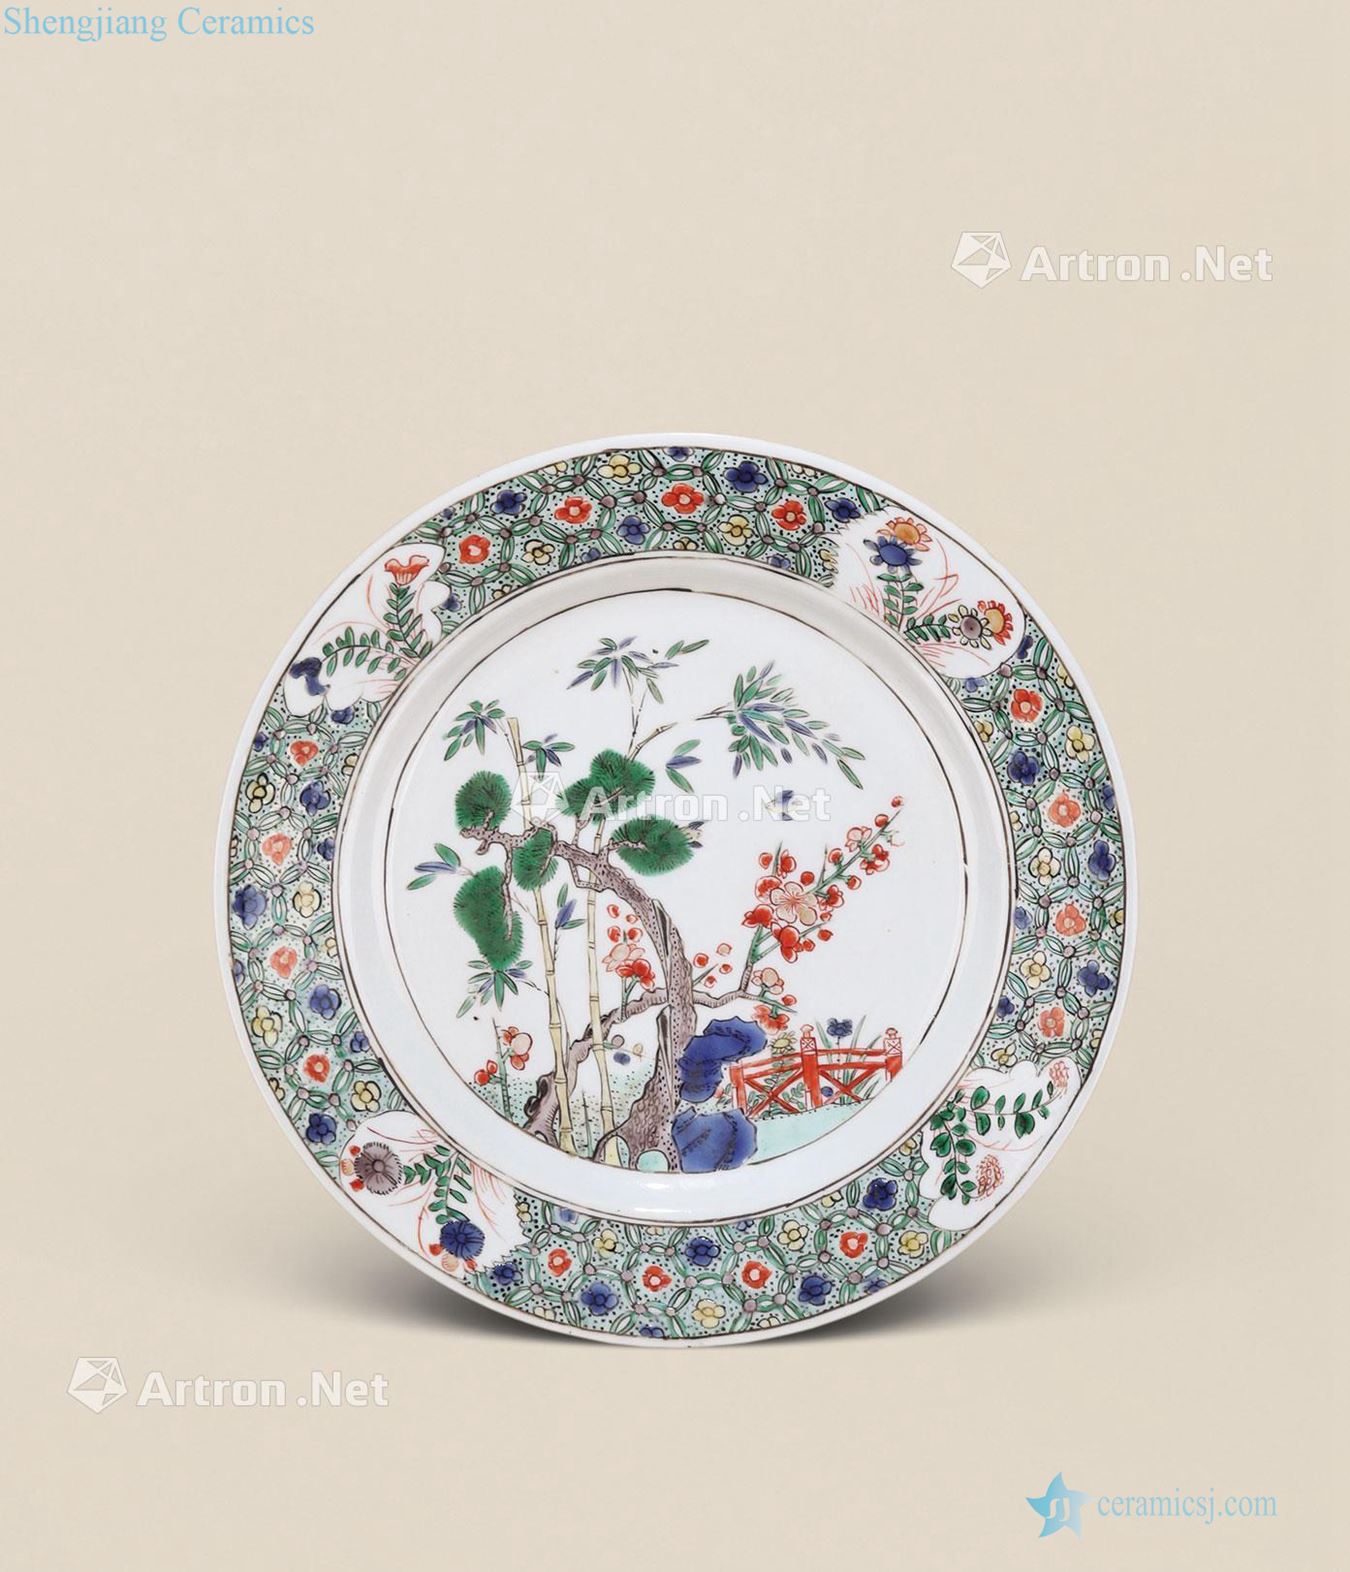 The qing emperor kangxi Age of colorful poetic pattern plate